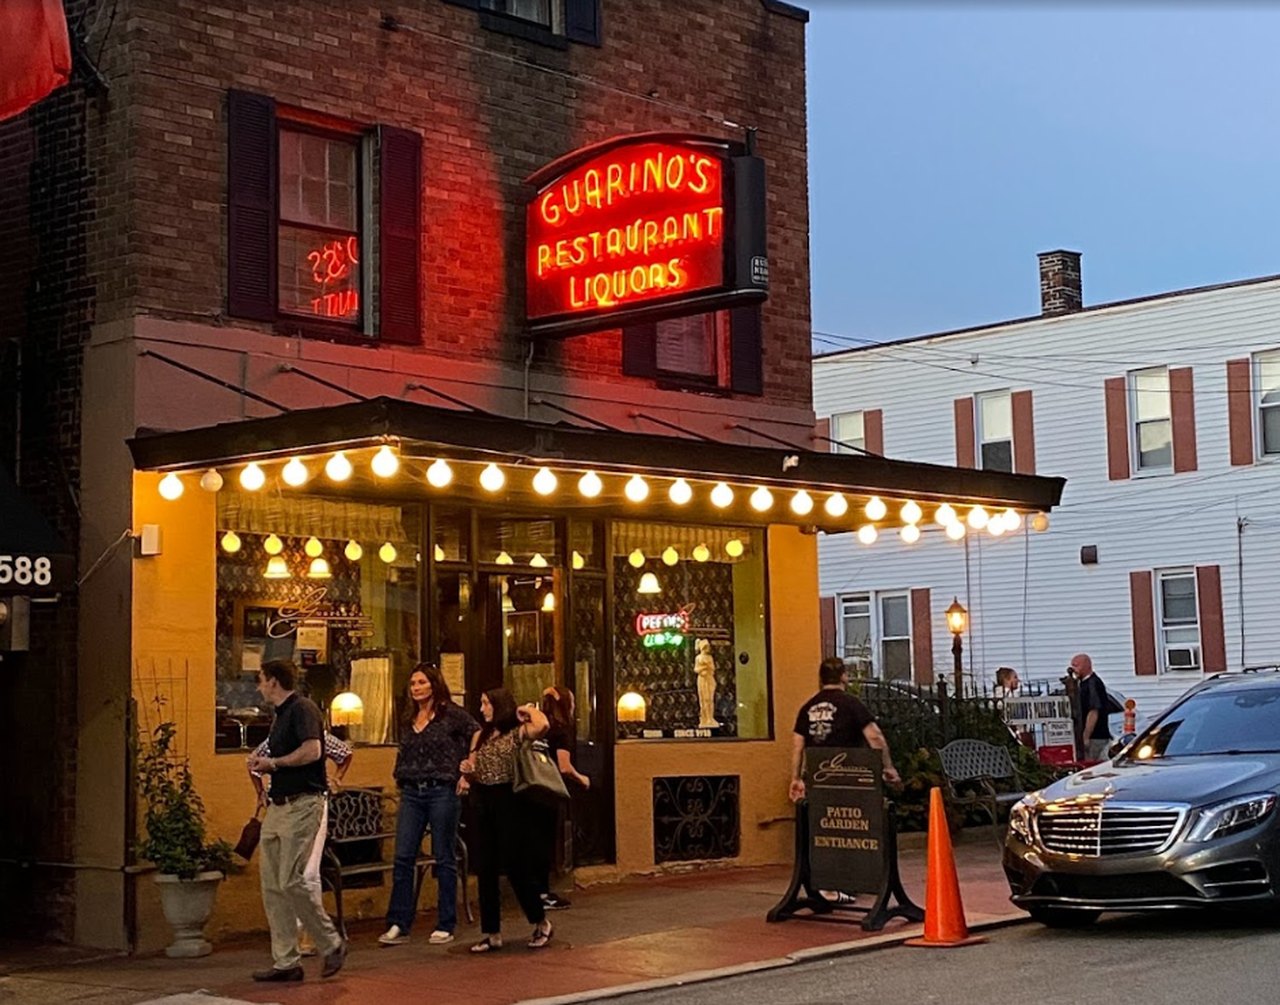 Dine At The Historic Spot In Cleveland Where Frank Sinatra Was Said To Unwind